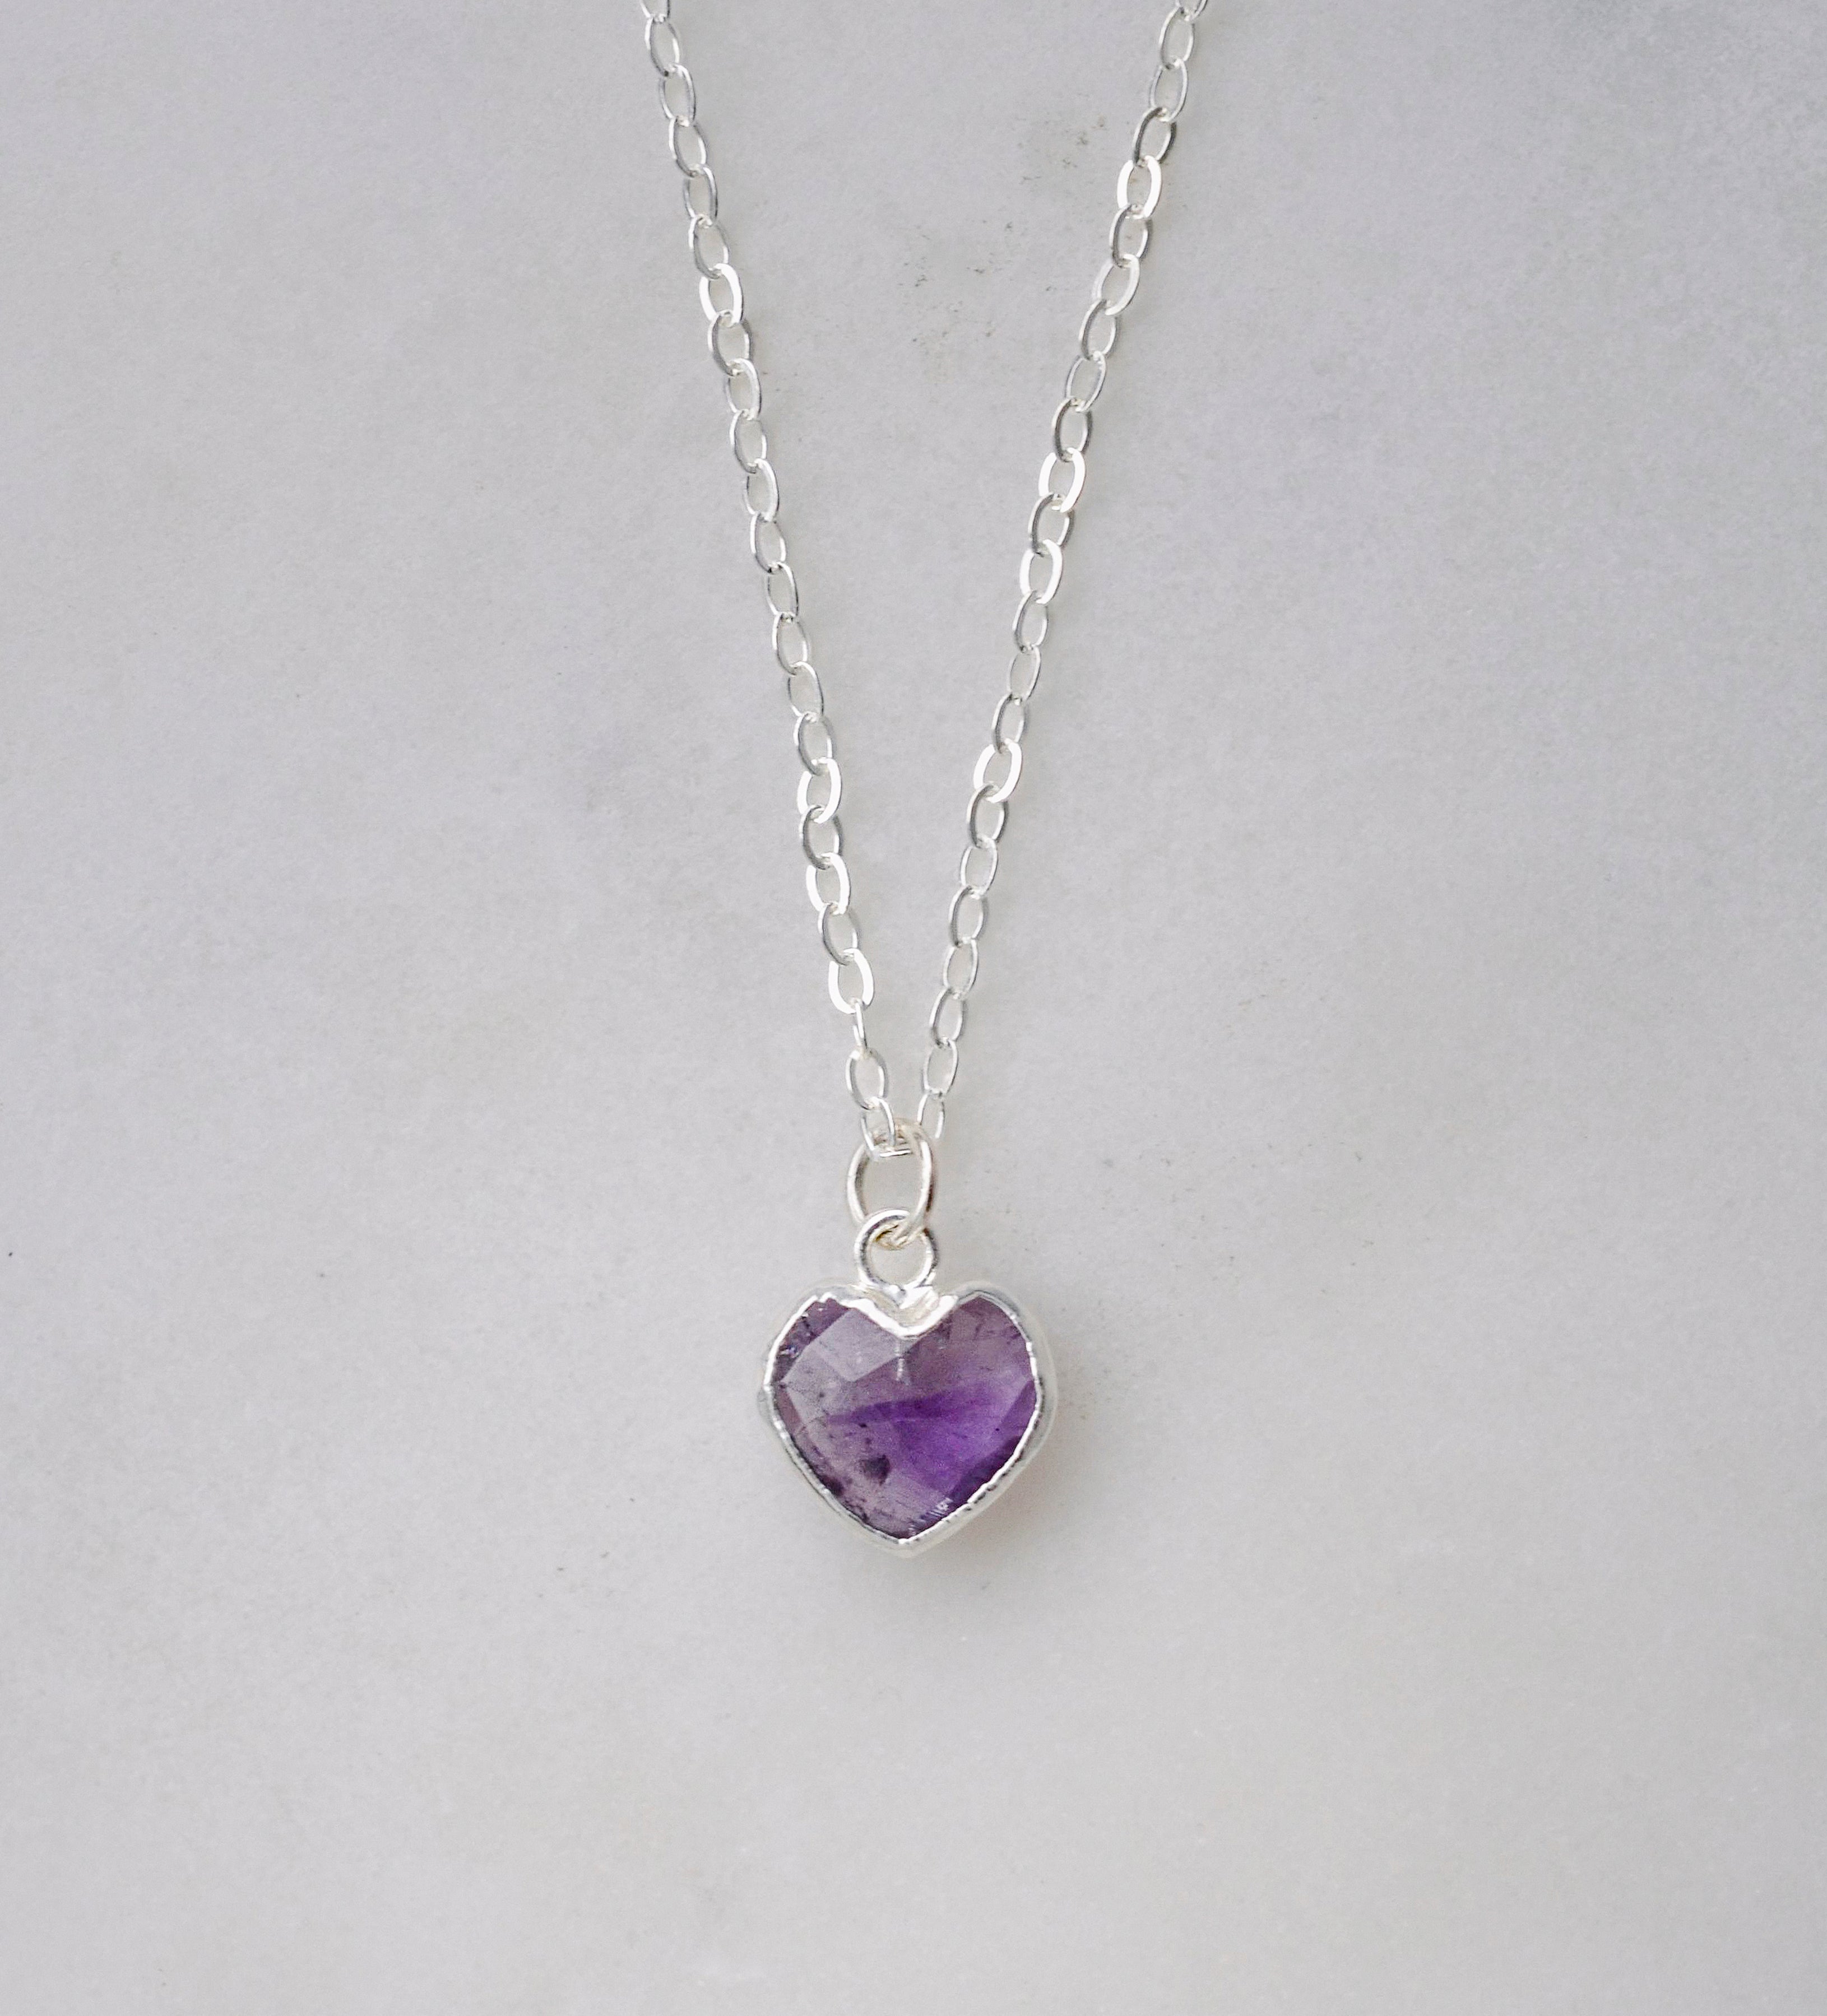 Forever In Your Heart Womens Sterling Silver Pendant Necklace Featuring An  Angel Wing Design Adorned With A Heart-Shaped Lilac Amethyst Center Stone